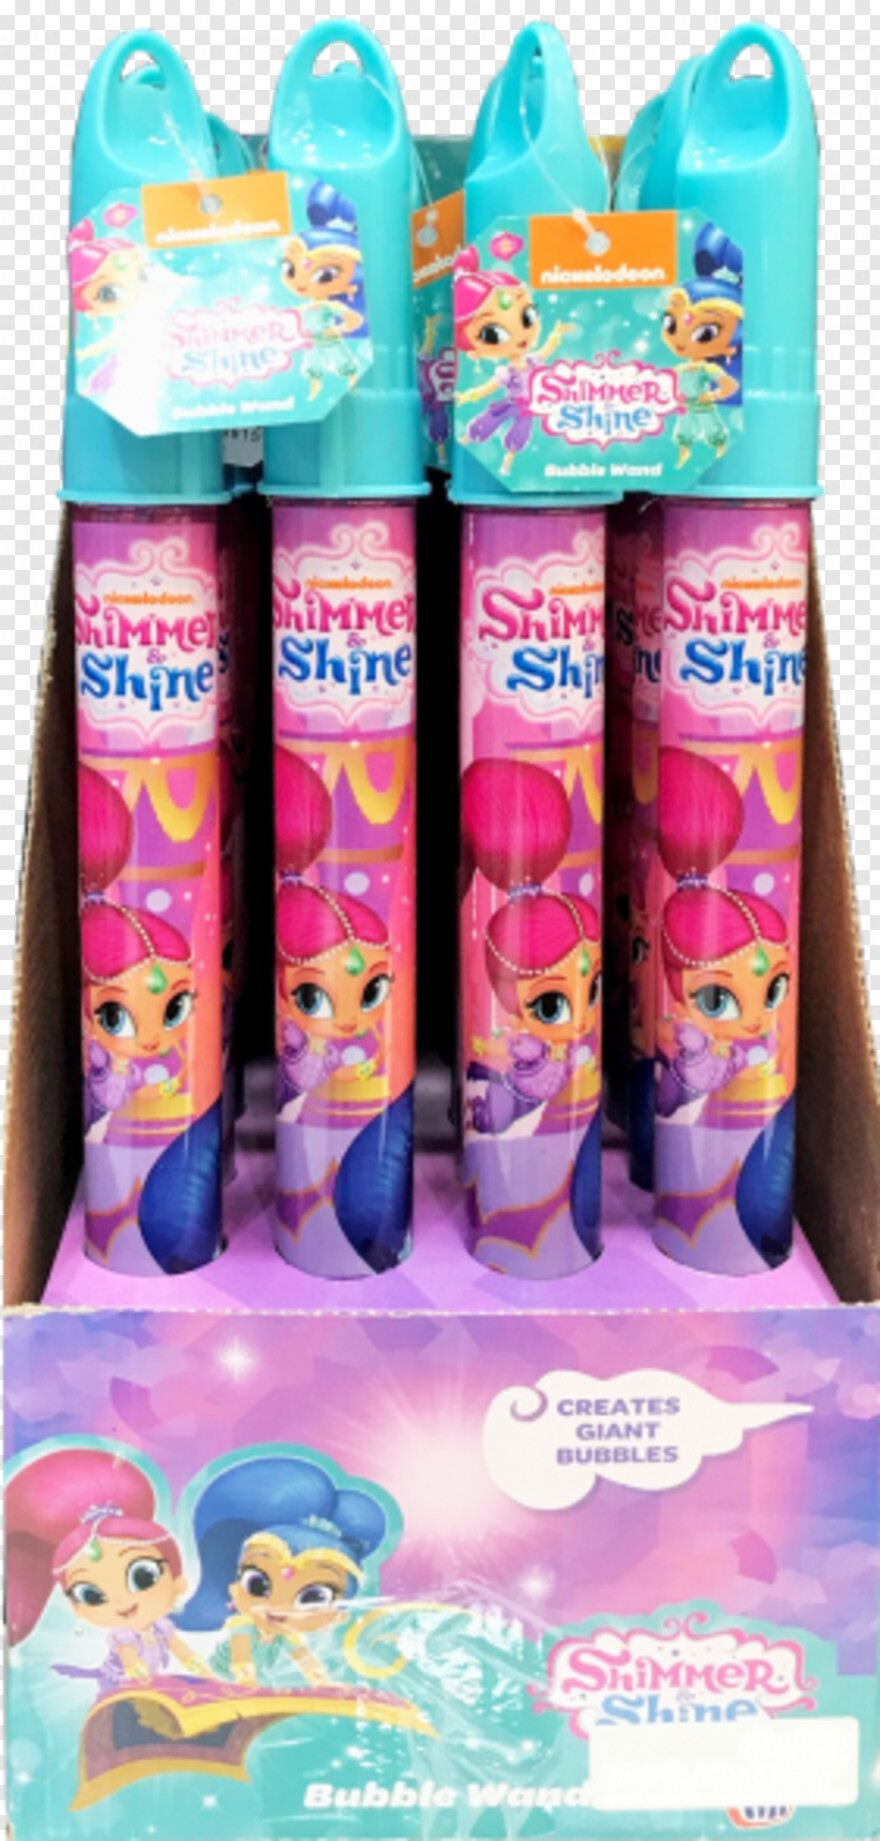  Shimmer And Shine, Message Bubble, Text Message Bubble, Bubble Guppies, Bubble Gum, Thought Bubble